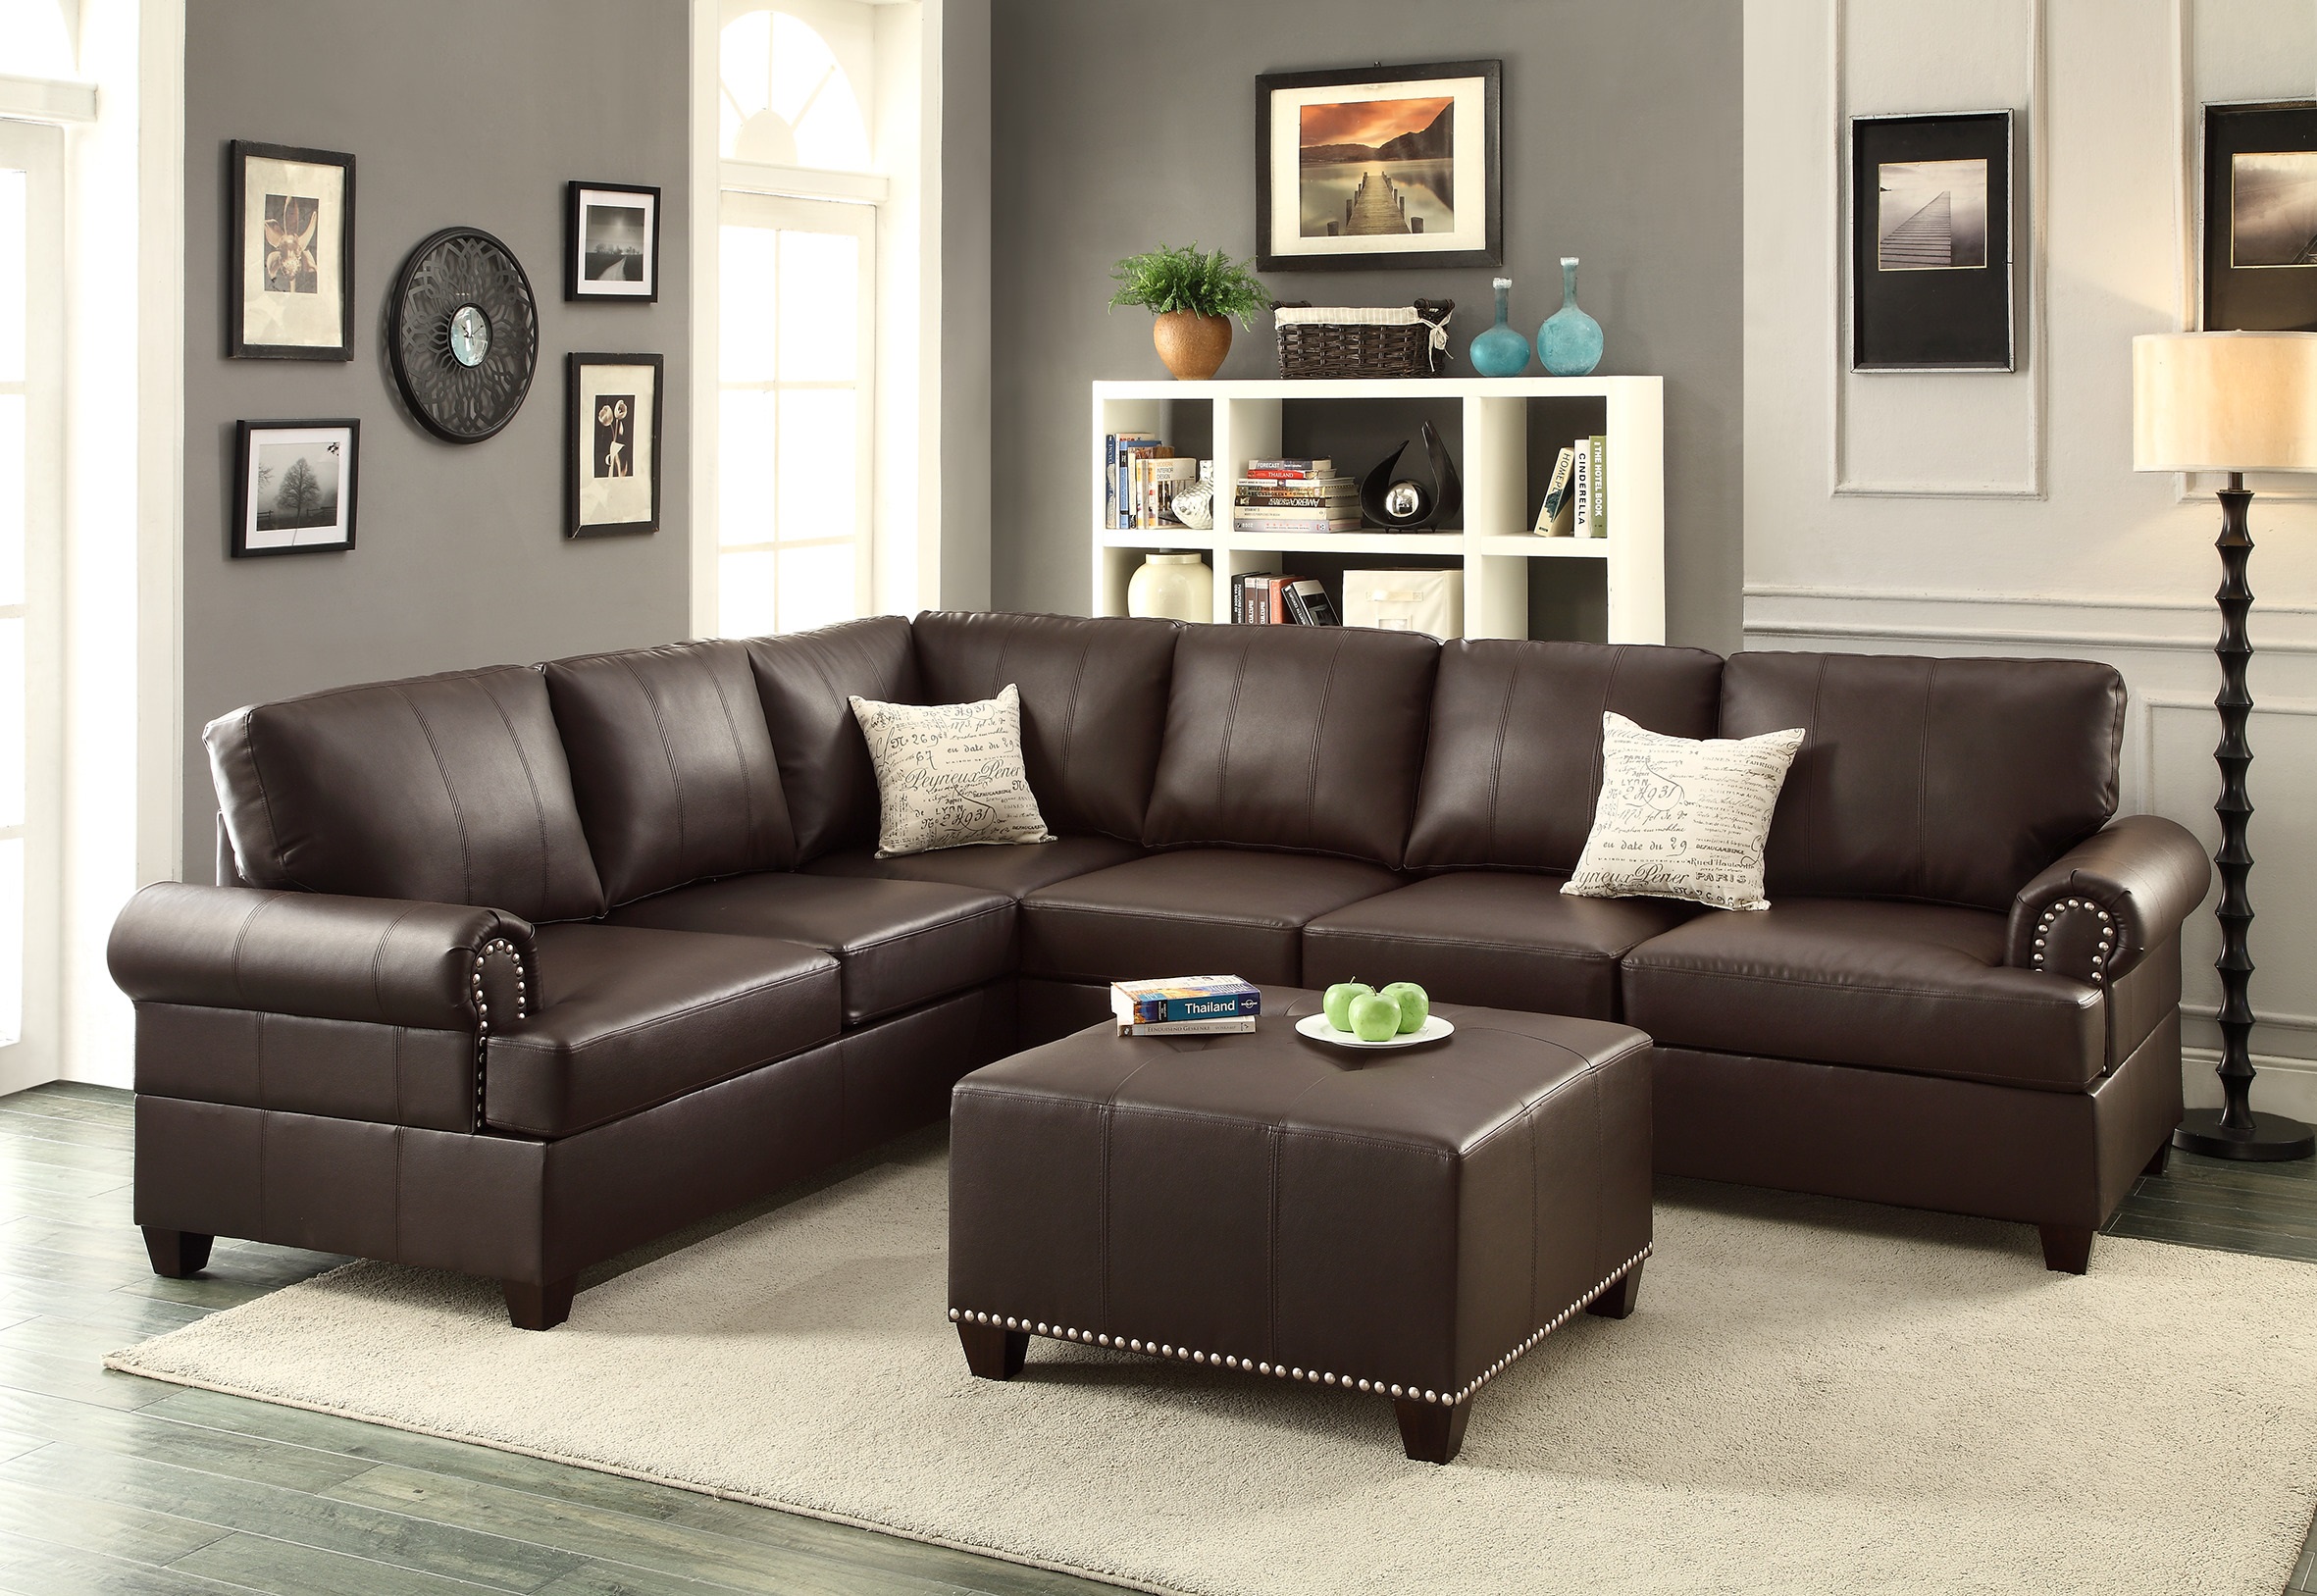 Wedge Sofa Couch Living Room Furniture, Espresso Living Room Furniture